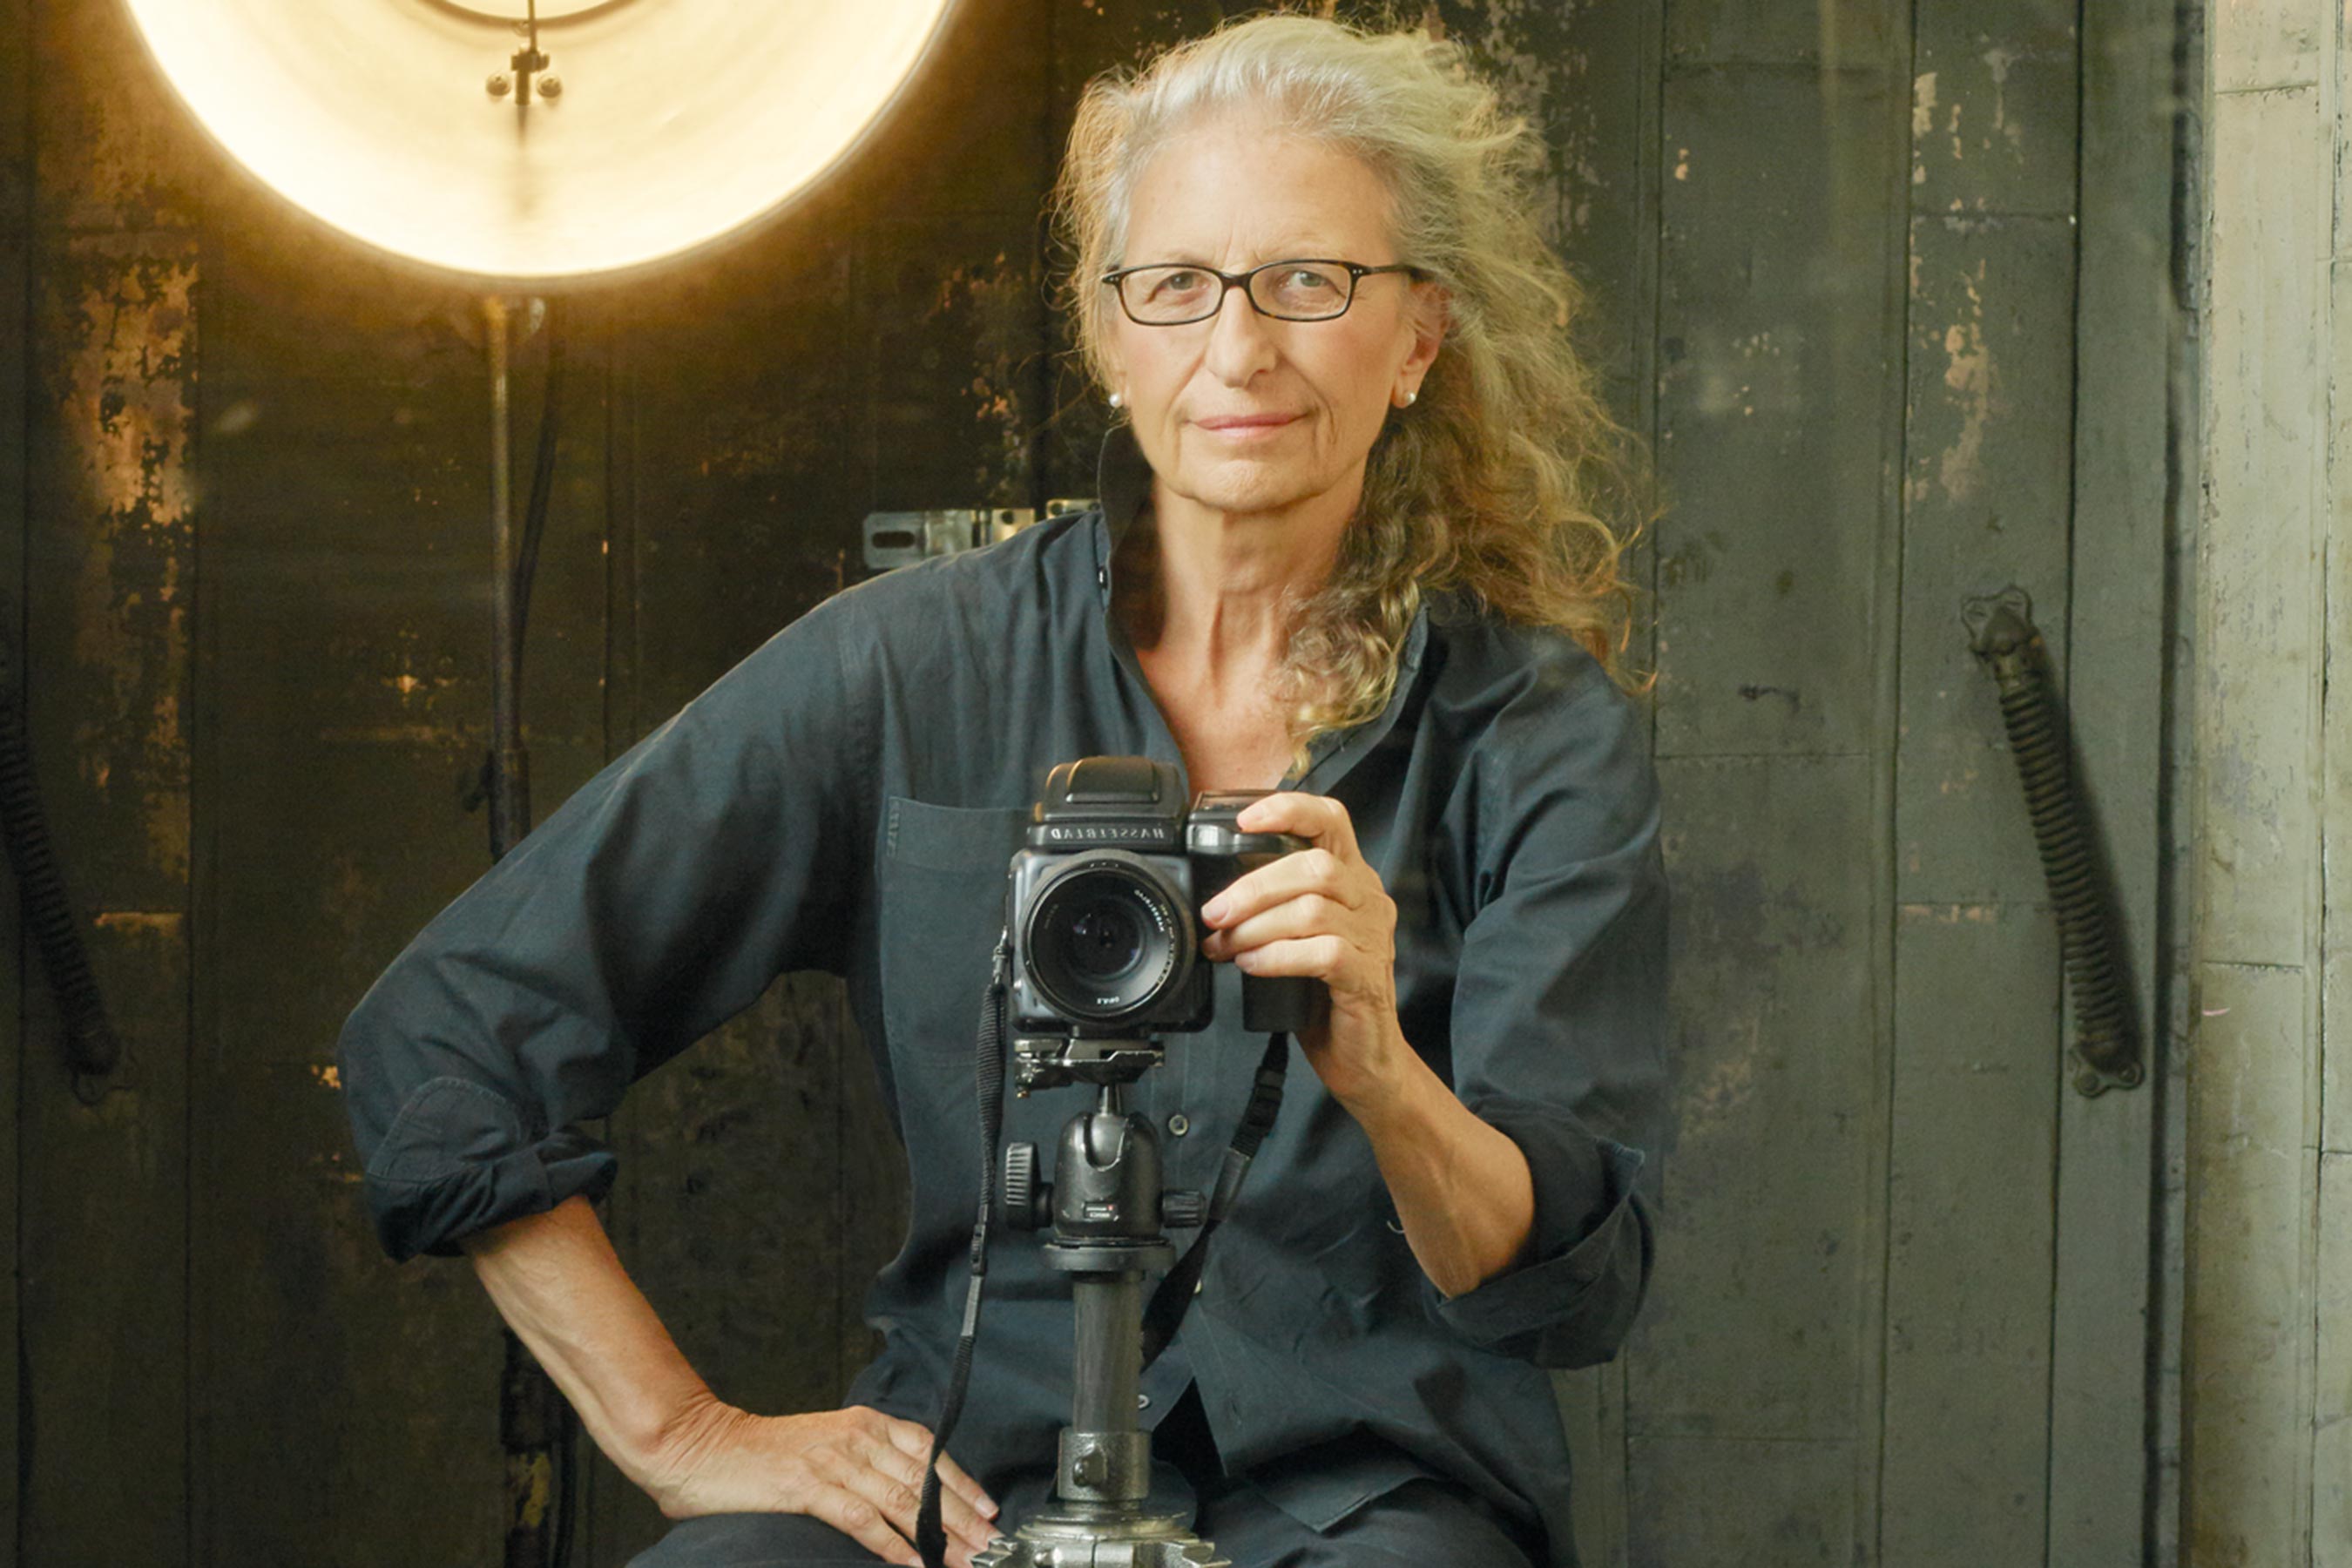 Icons of photography annie leibovitz â the united nations of photography